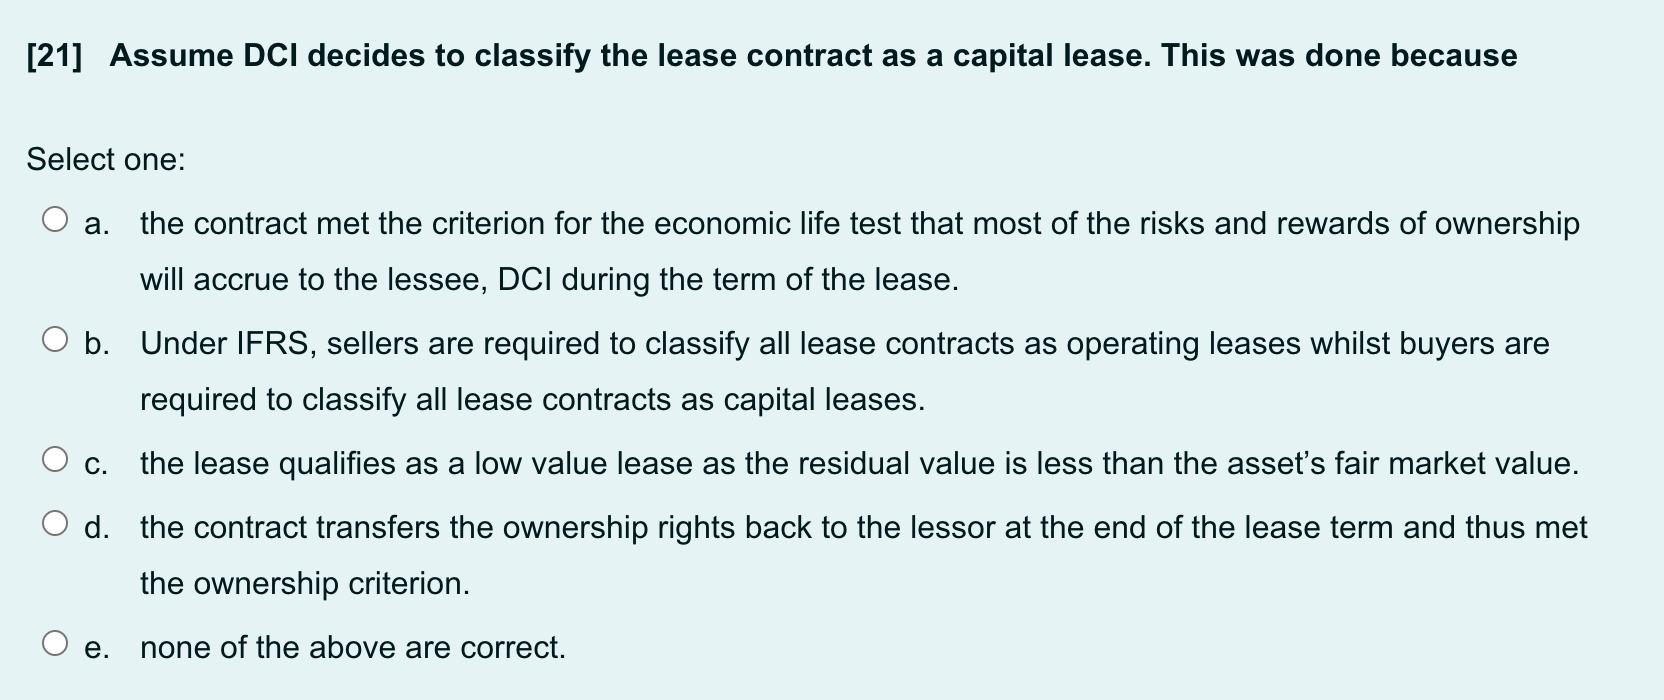 [21] Assume DCI decides to classify the lease contract as a capital lease. This was done because Select one: a. the contract